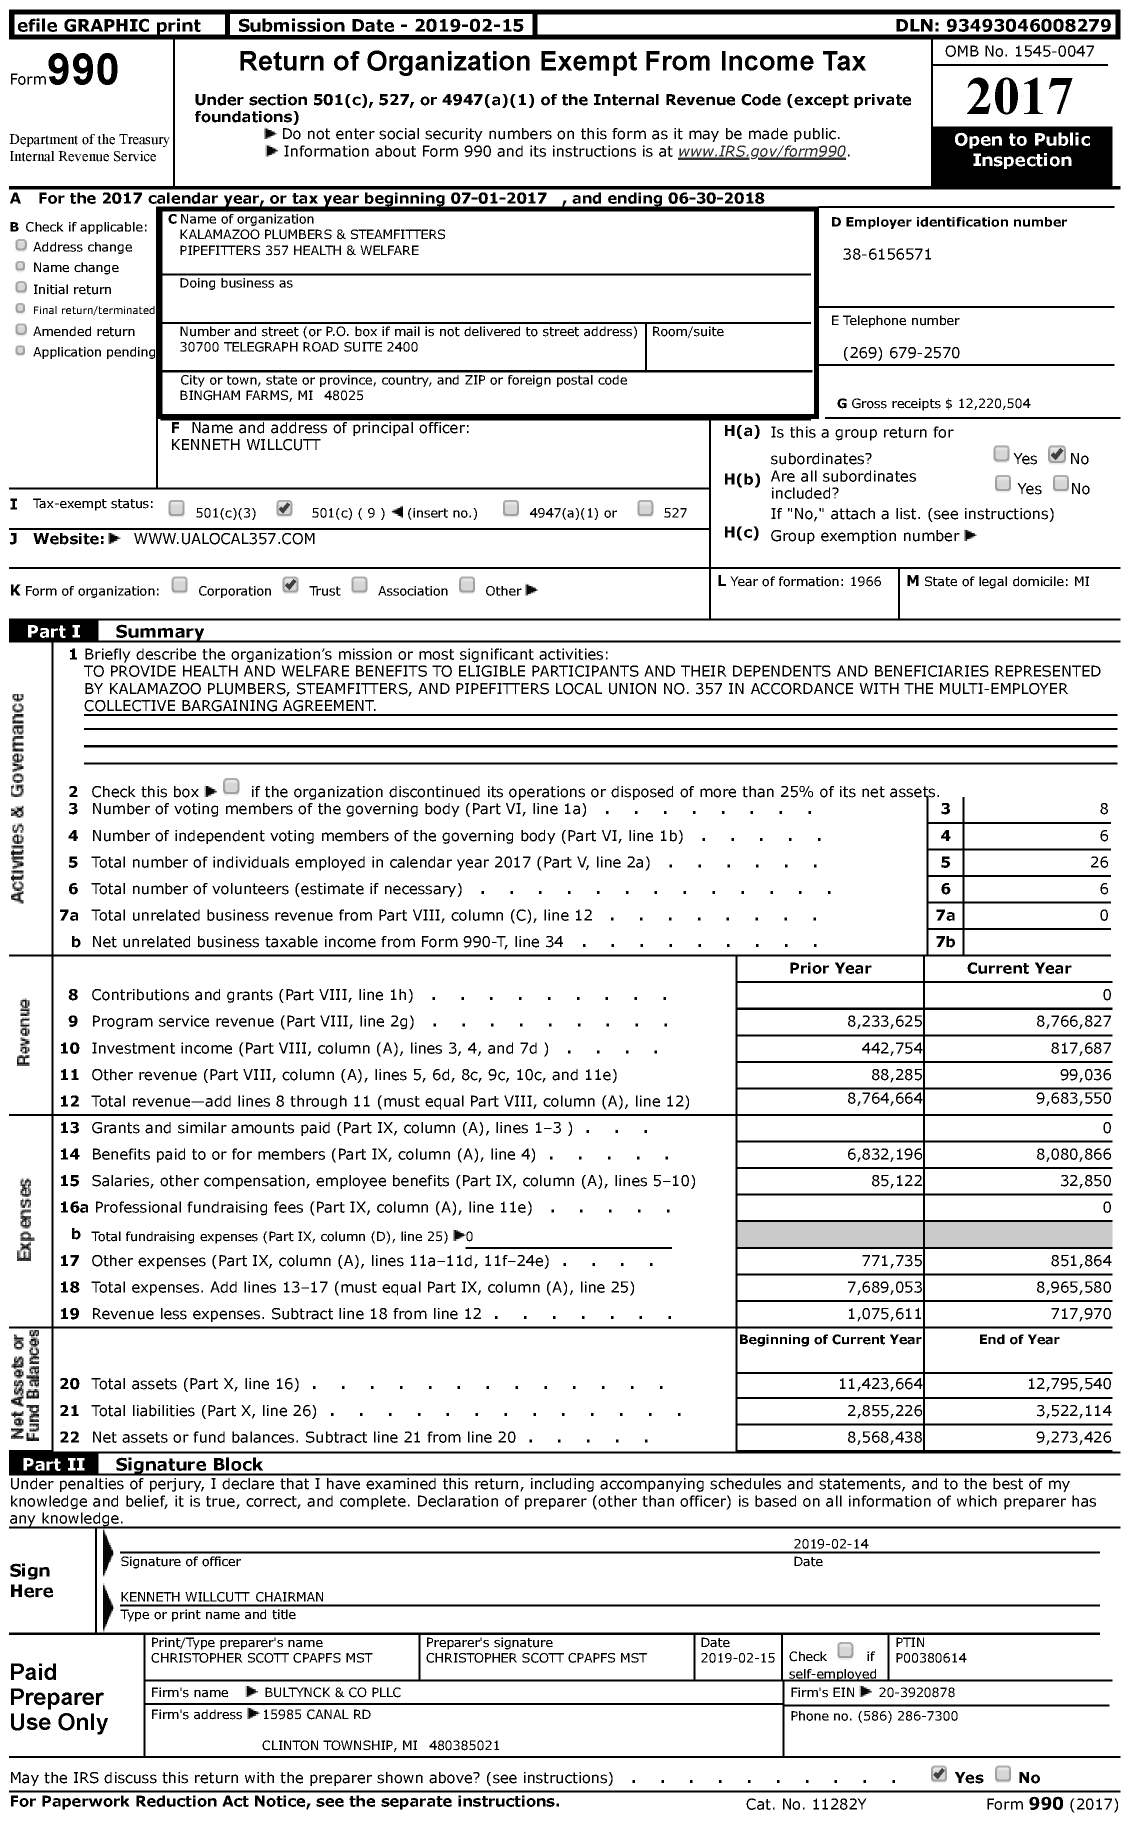 Image of first page of 2017 Form 990 for Kalamazoo Plumbers and Steamfitters Pipefitters 357 Health and Welfare